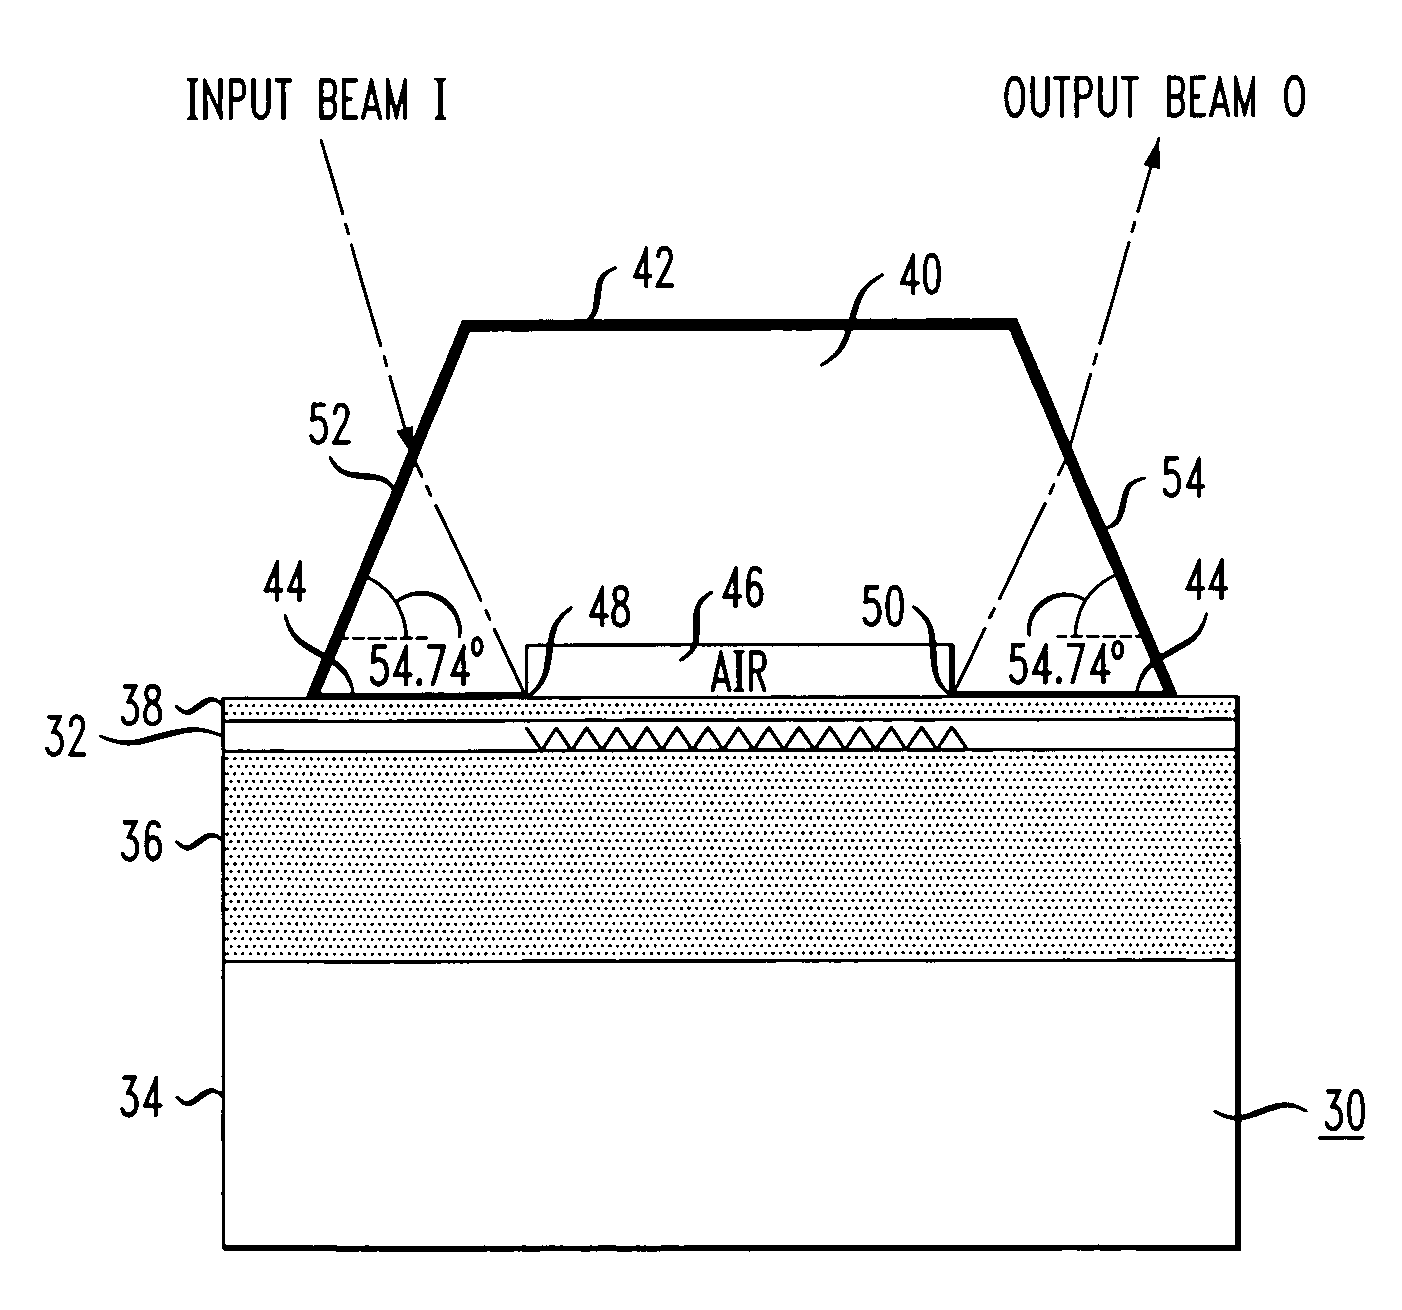 Permanent light coupling arrangement and method for use with thin silicon optical waveguides